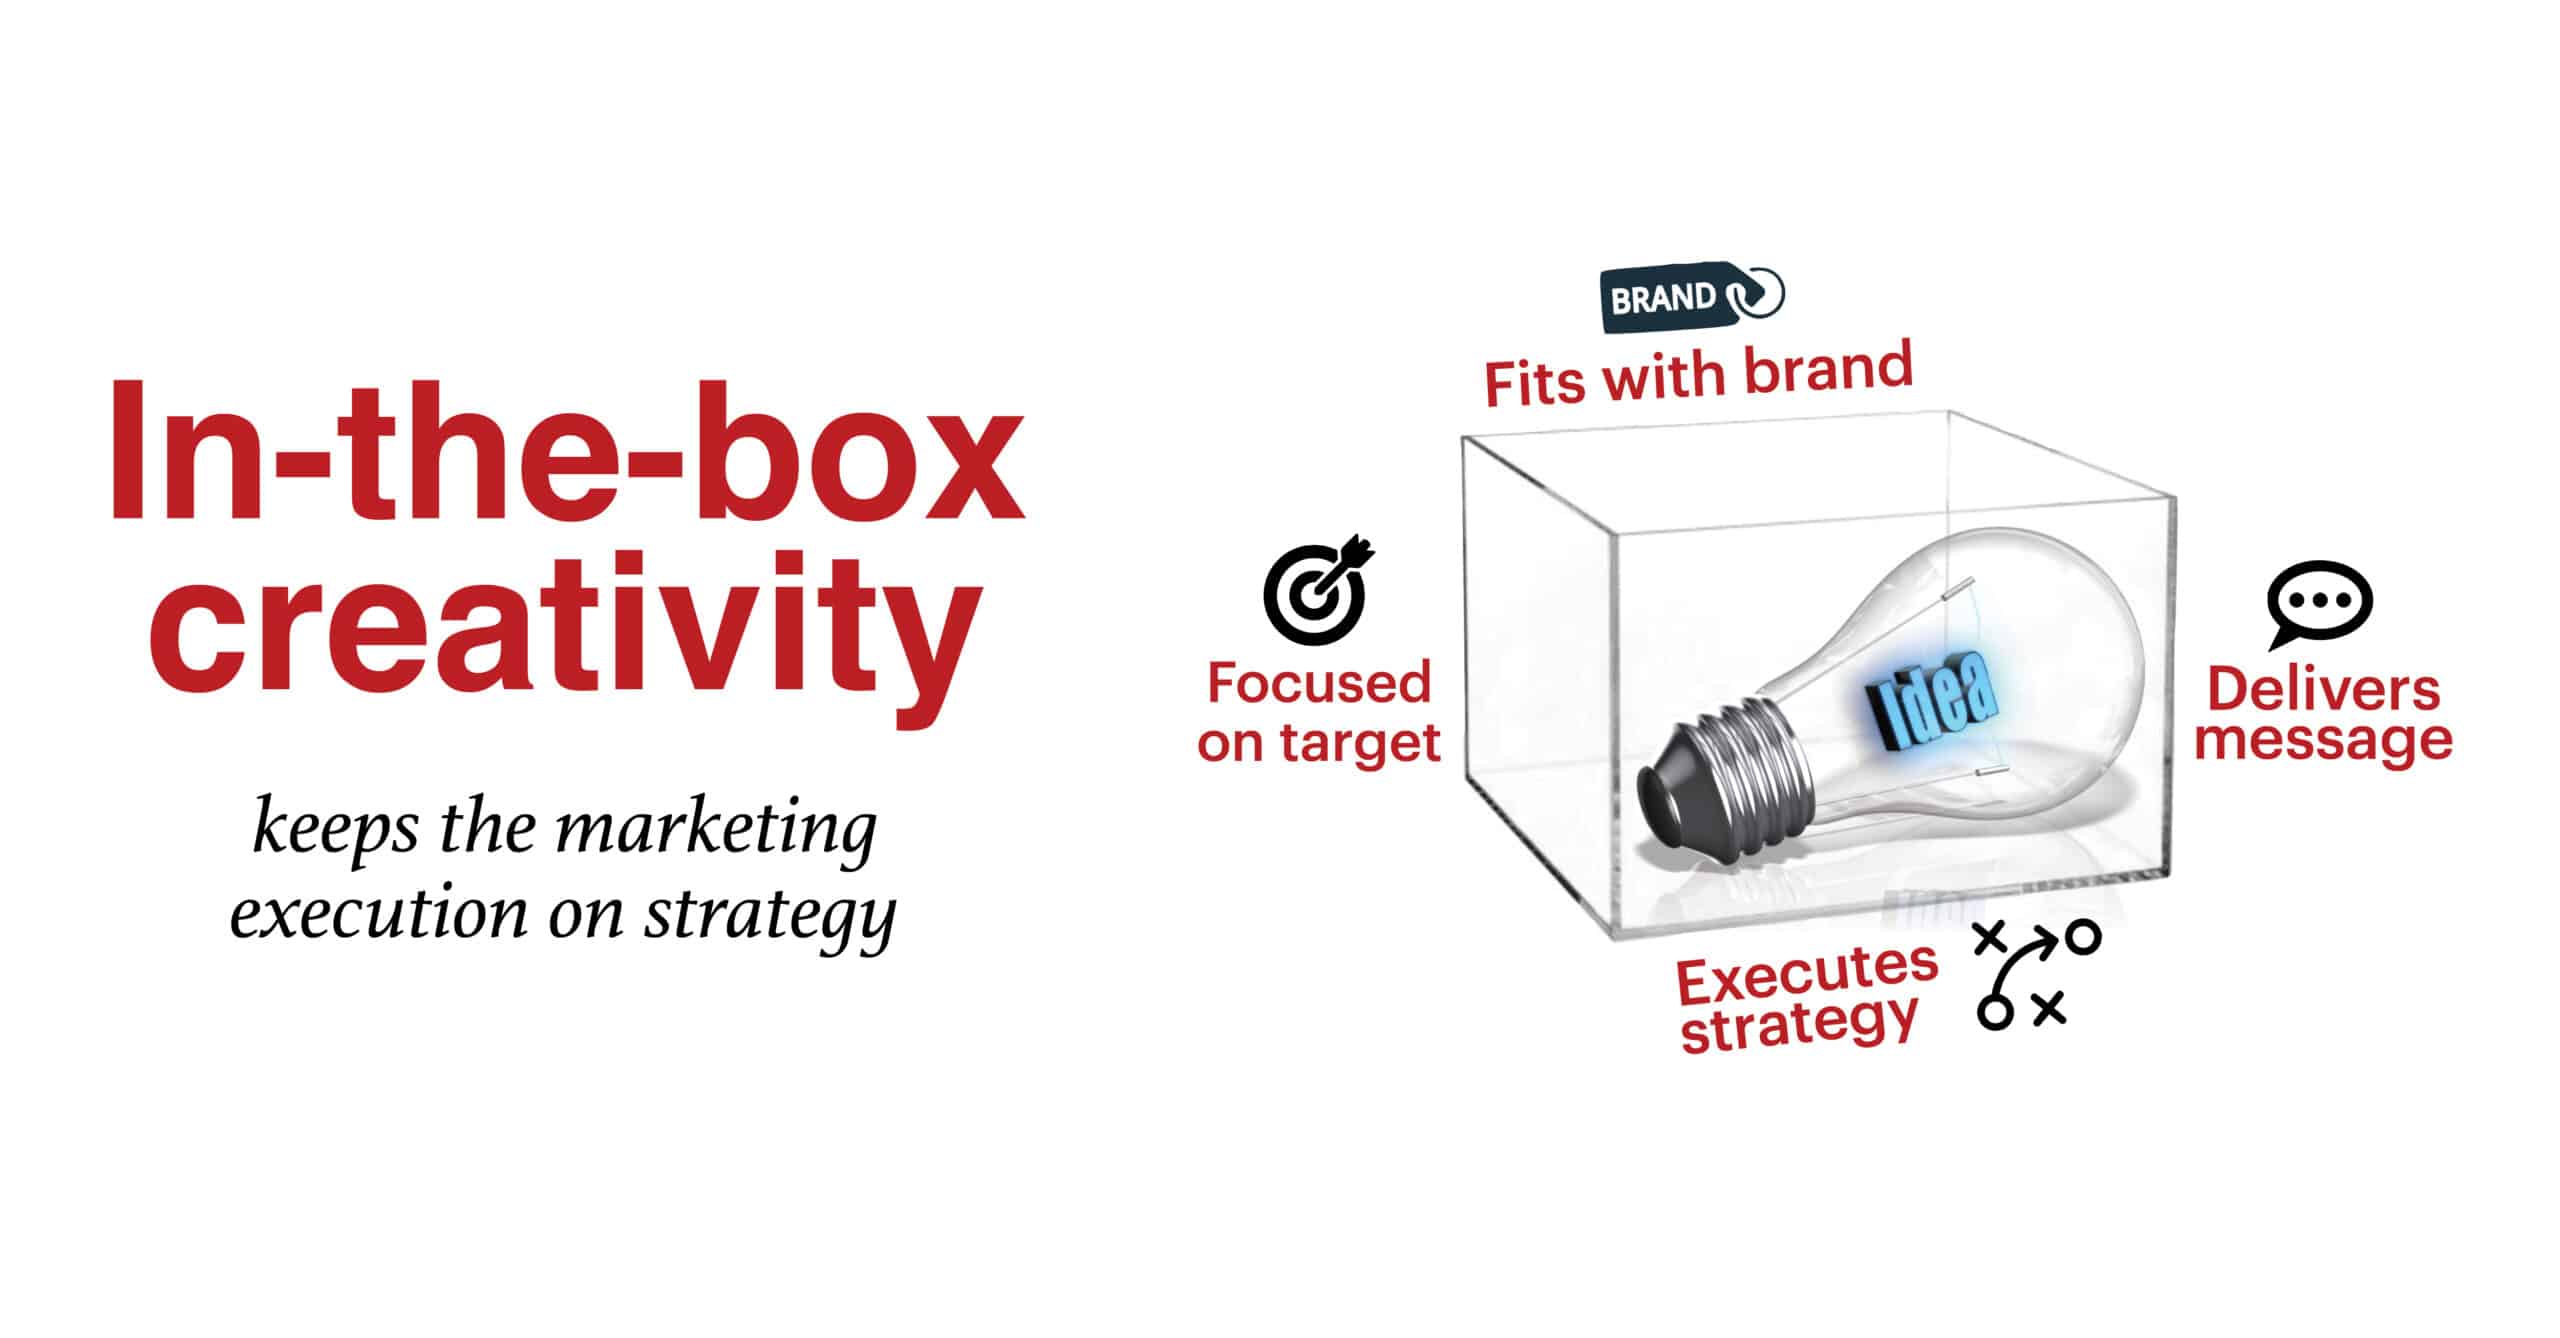 in-the-box creativity keeps the marketing execution on strategy